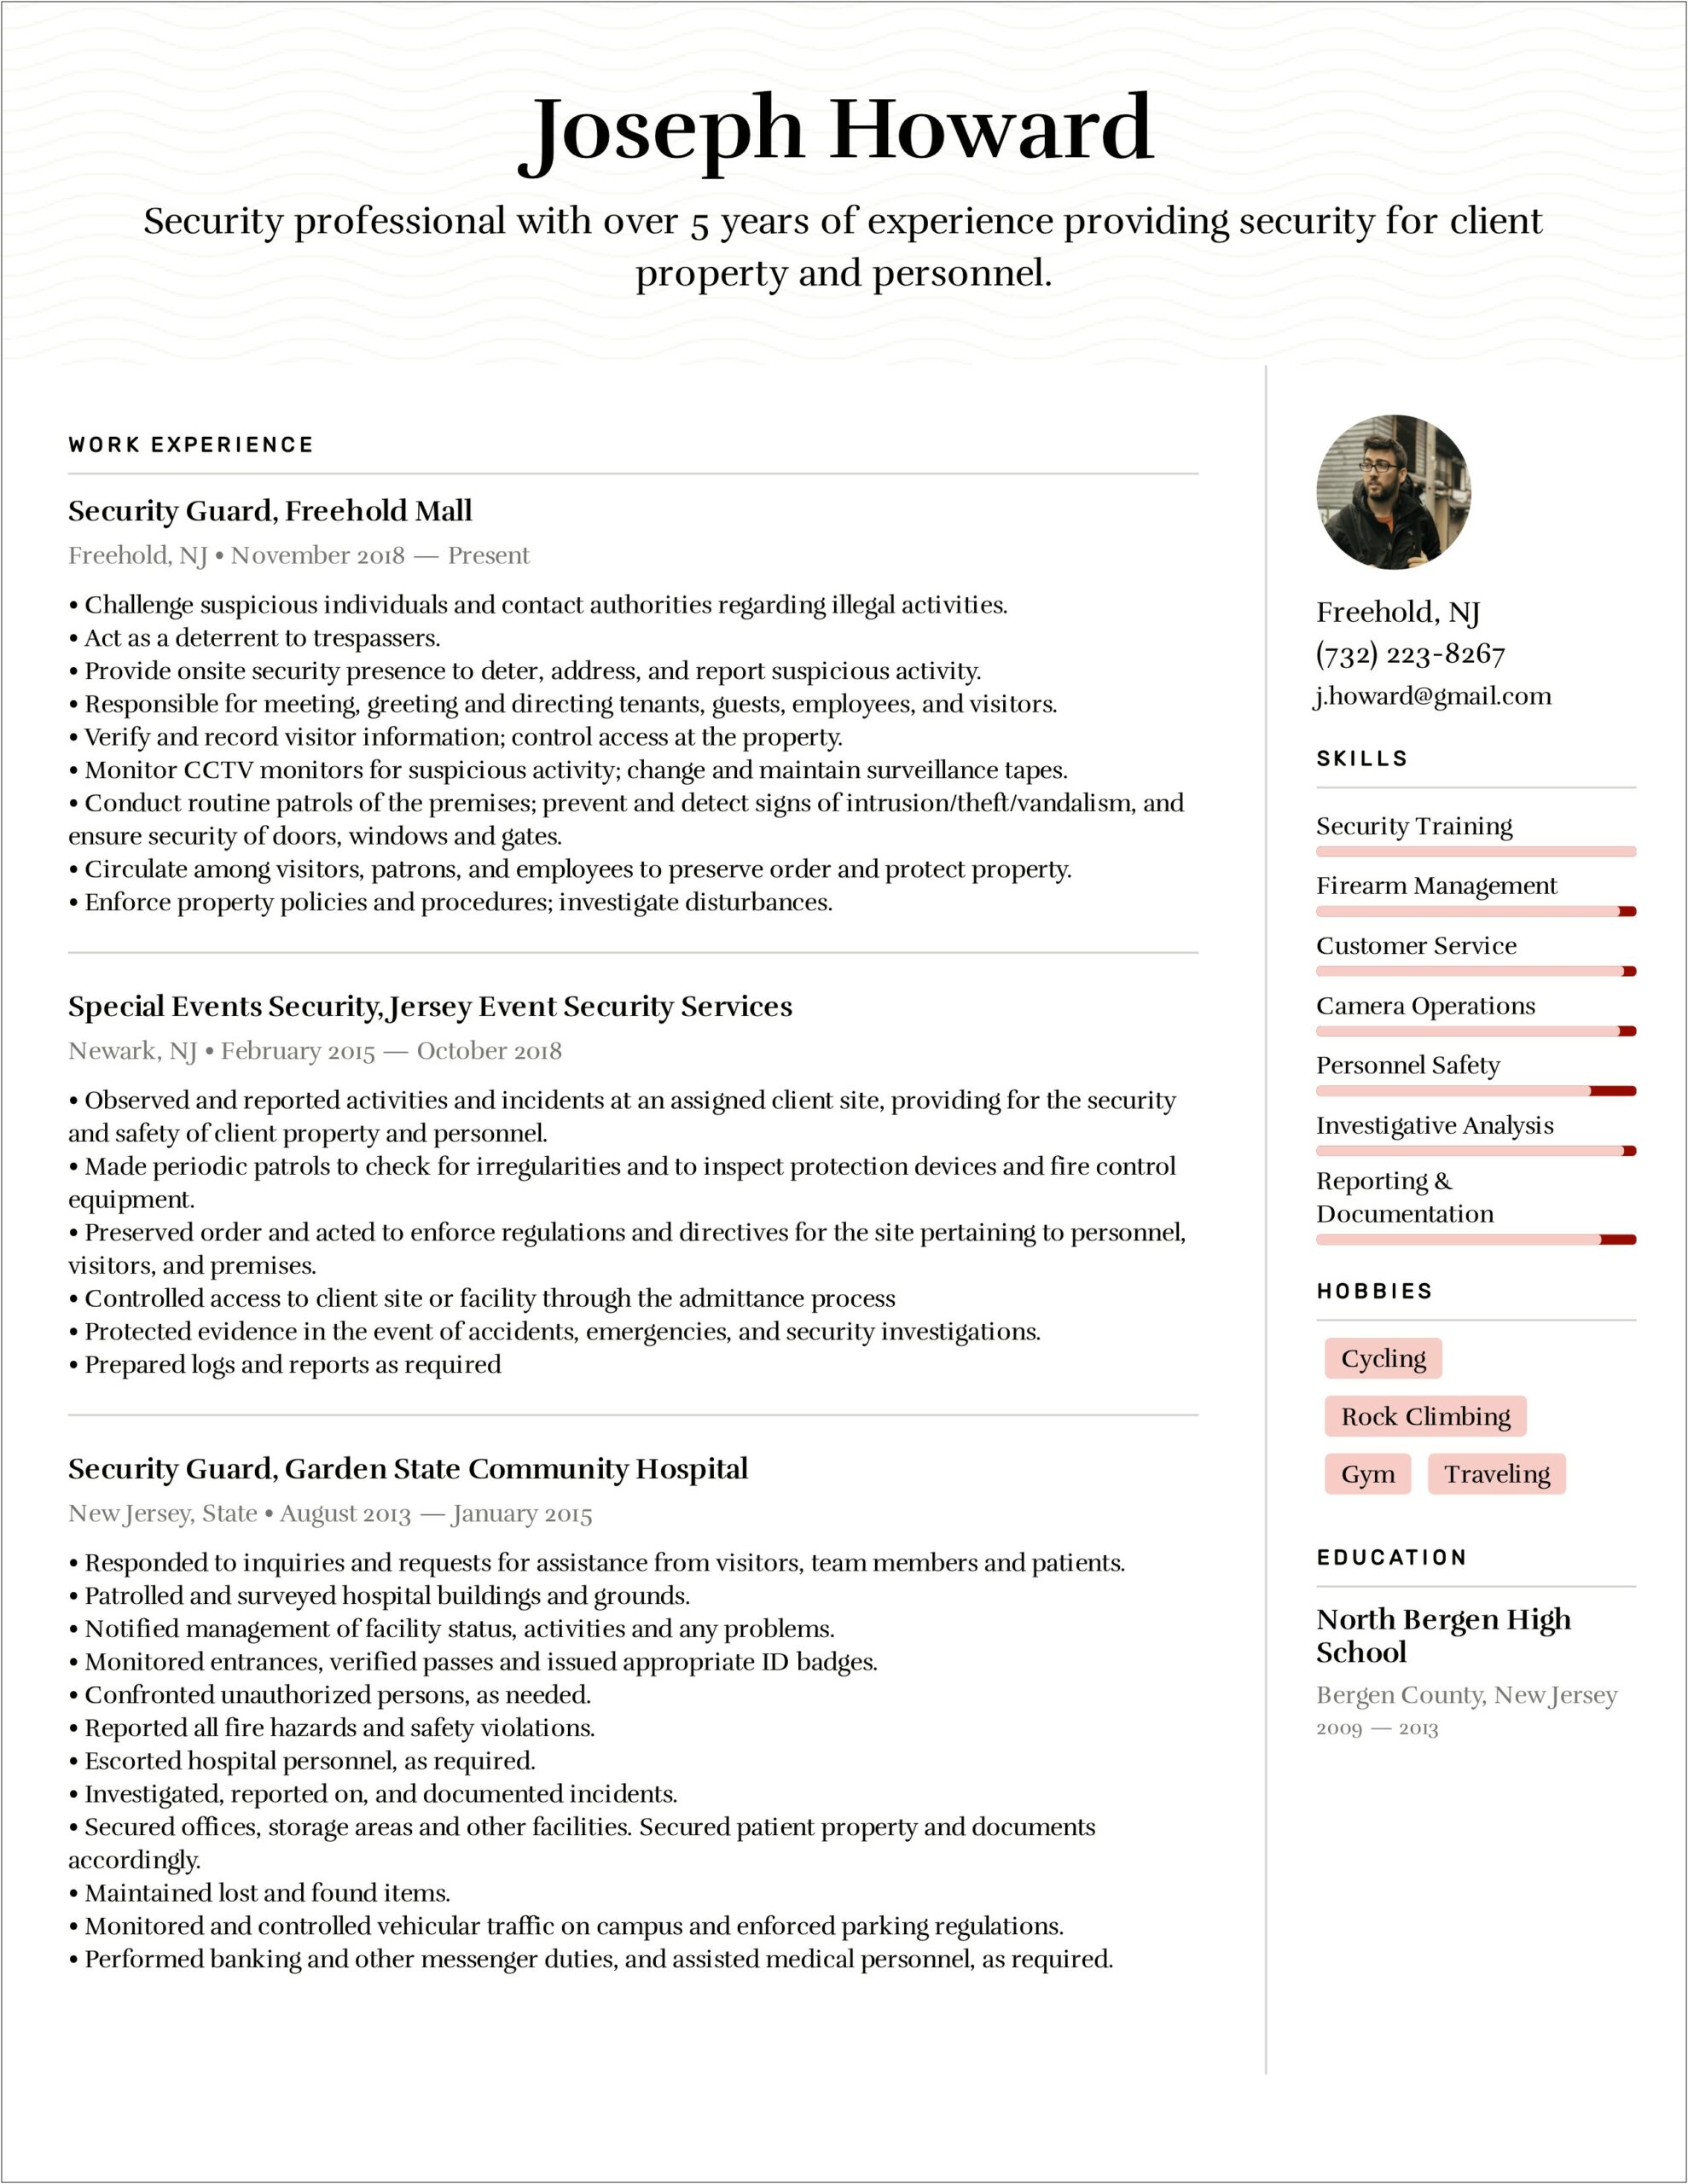 Sample Hobbies And Interests For Resume